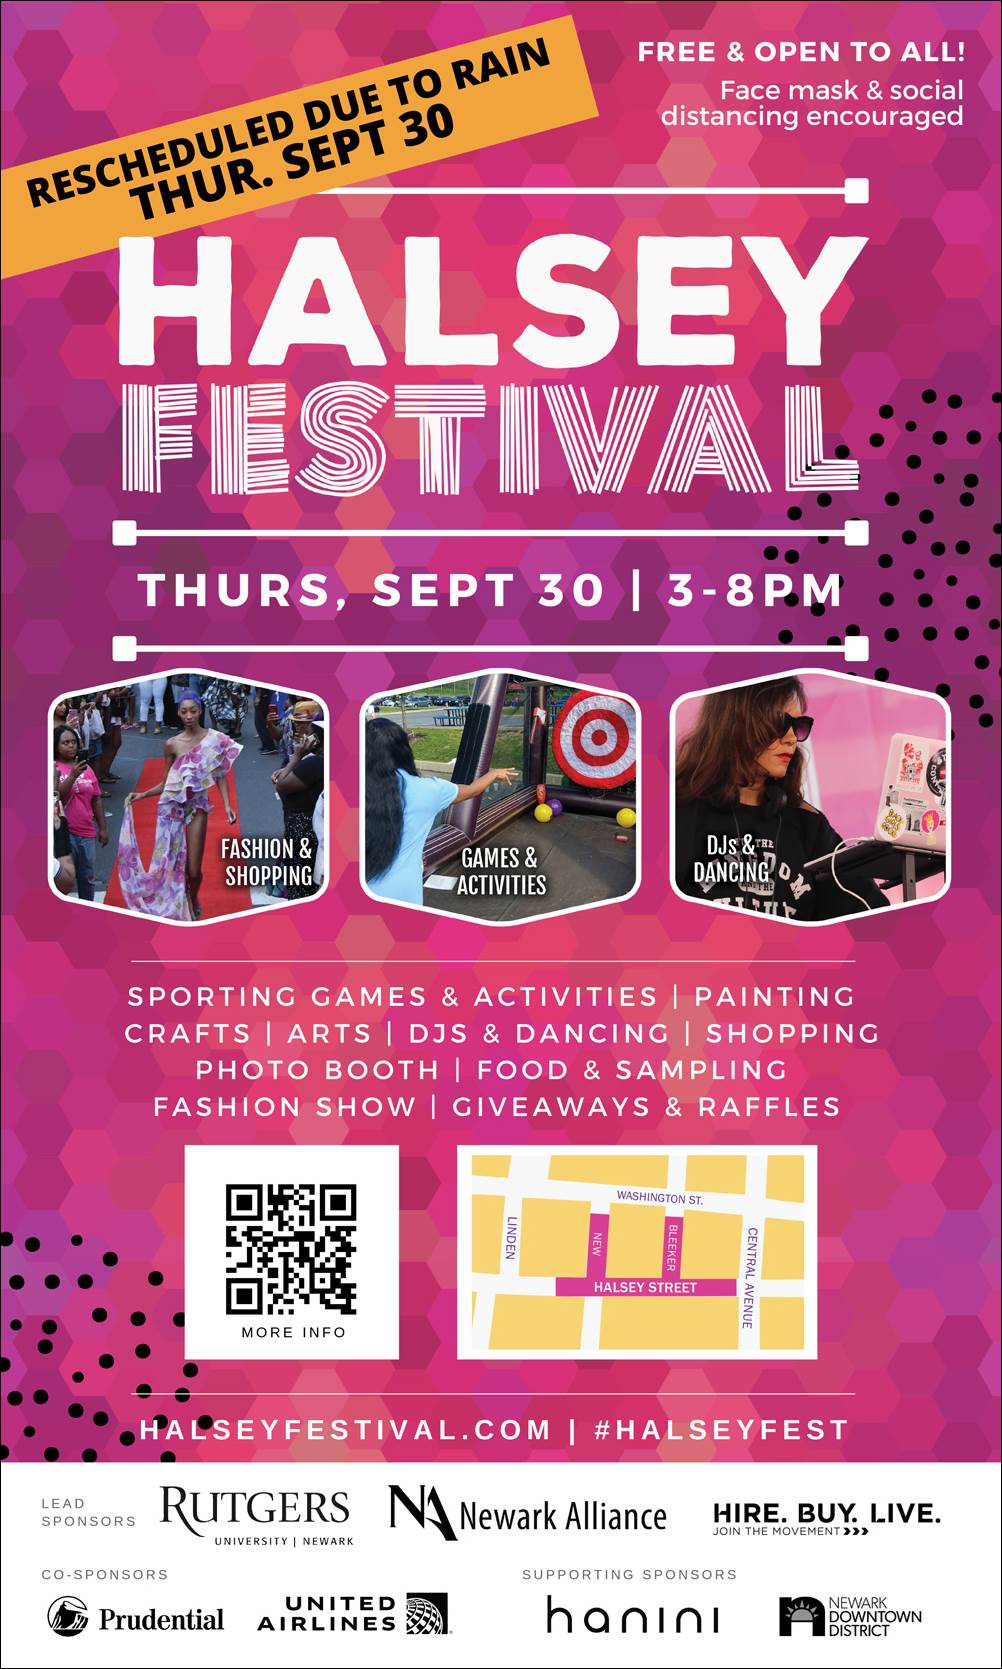 Halsey Street Festival Announcement Graphic with sponsors listed at the bottom, photos in hexagons showing people playing games and music as well as showing off fashion